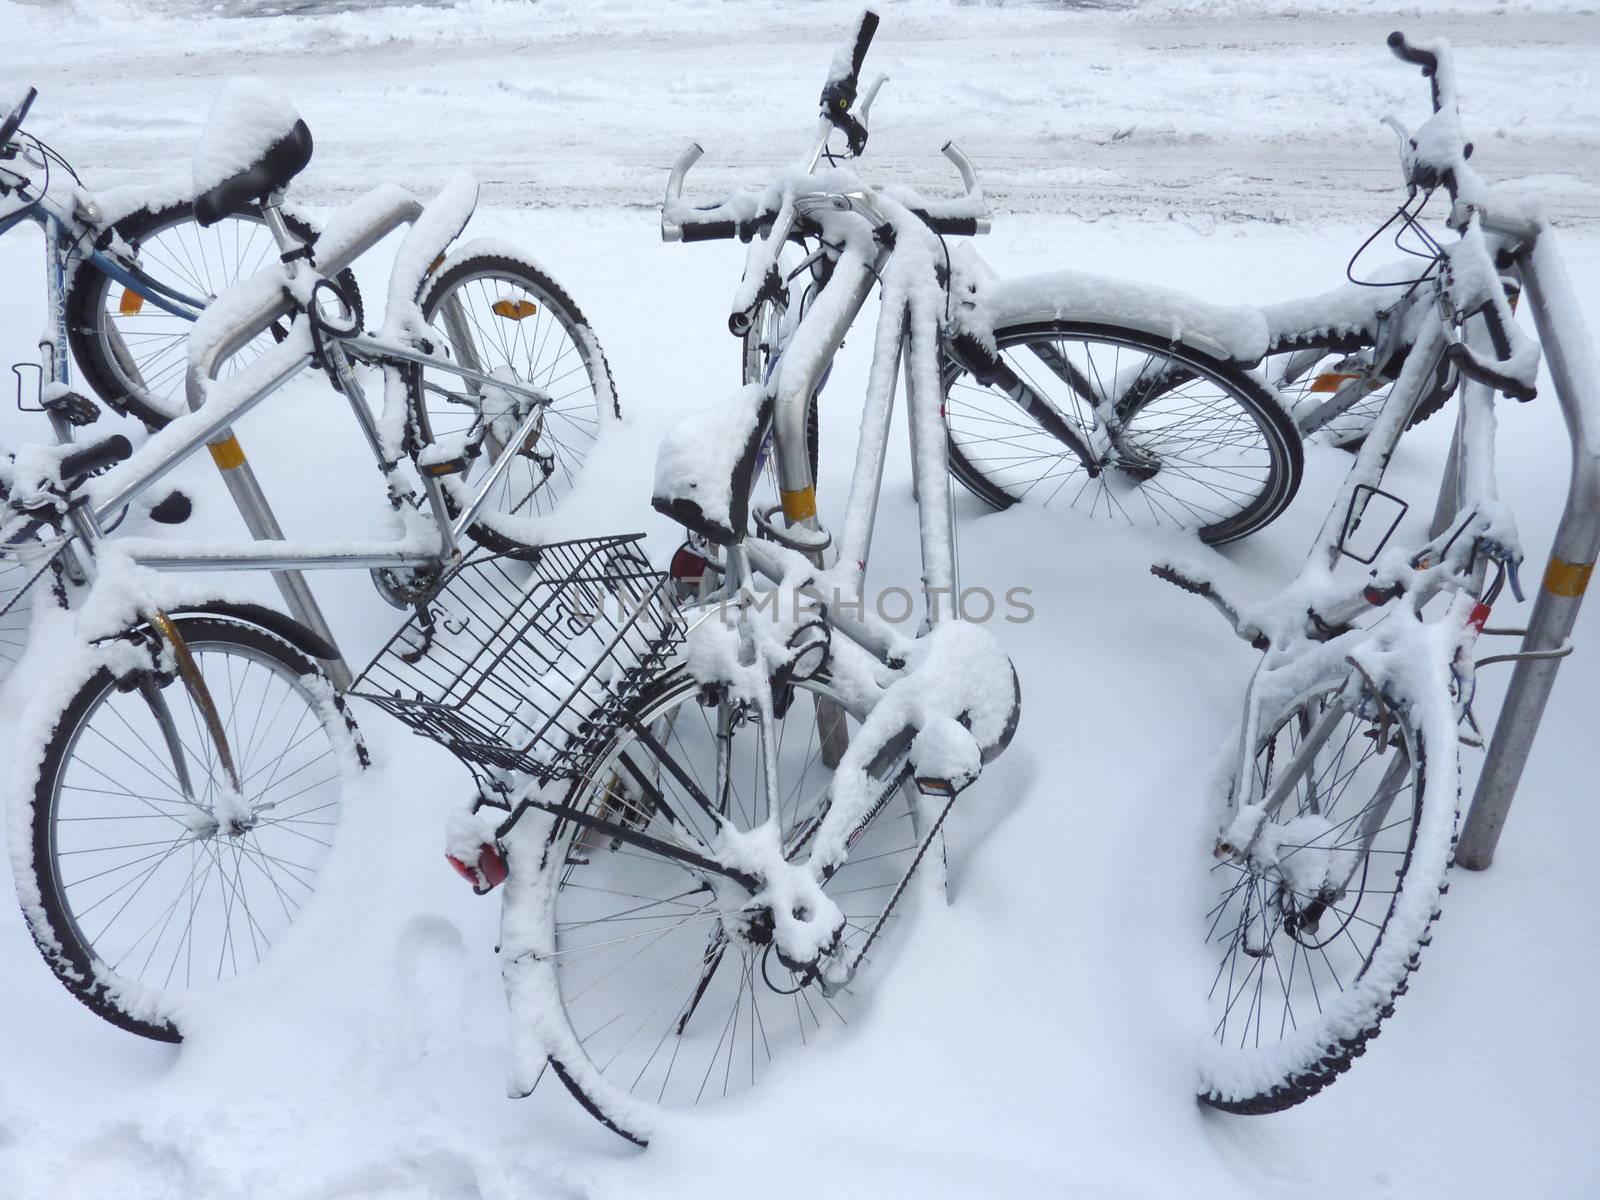 Several bicycles covered by snow in the street